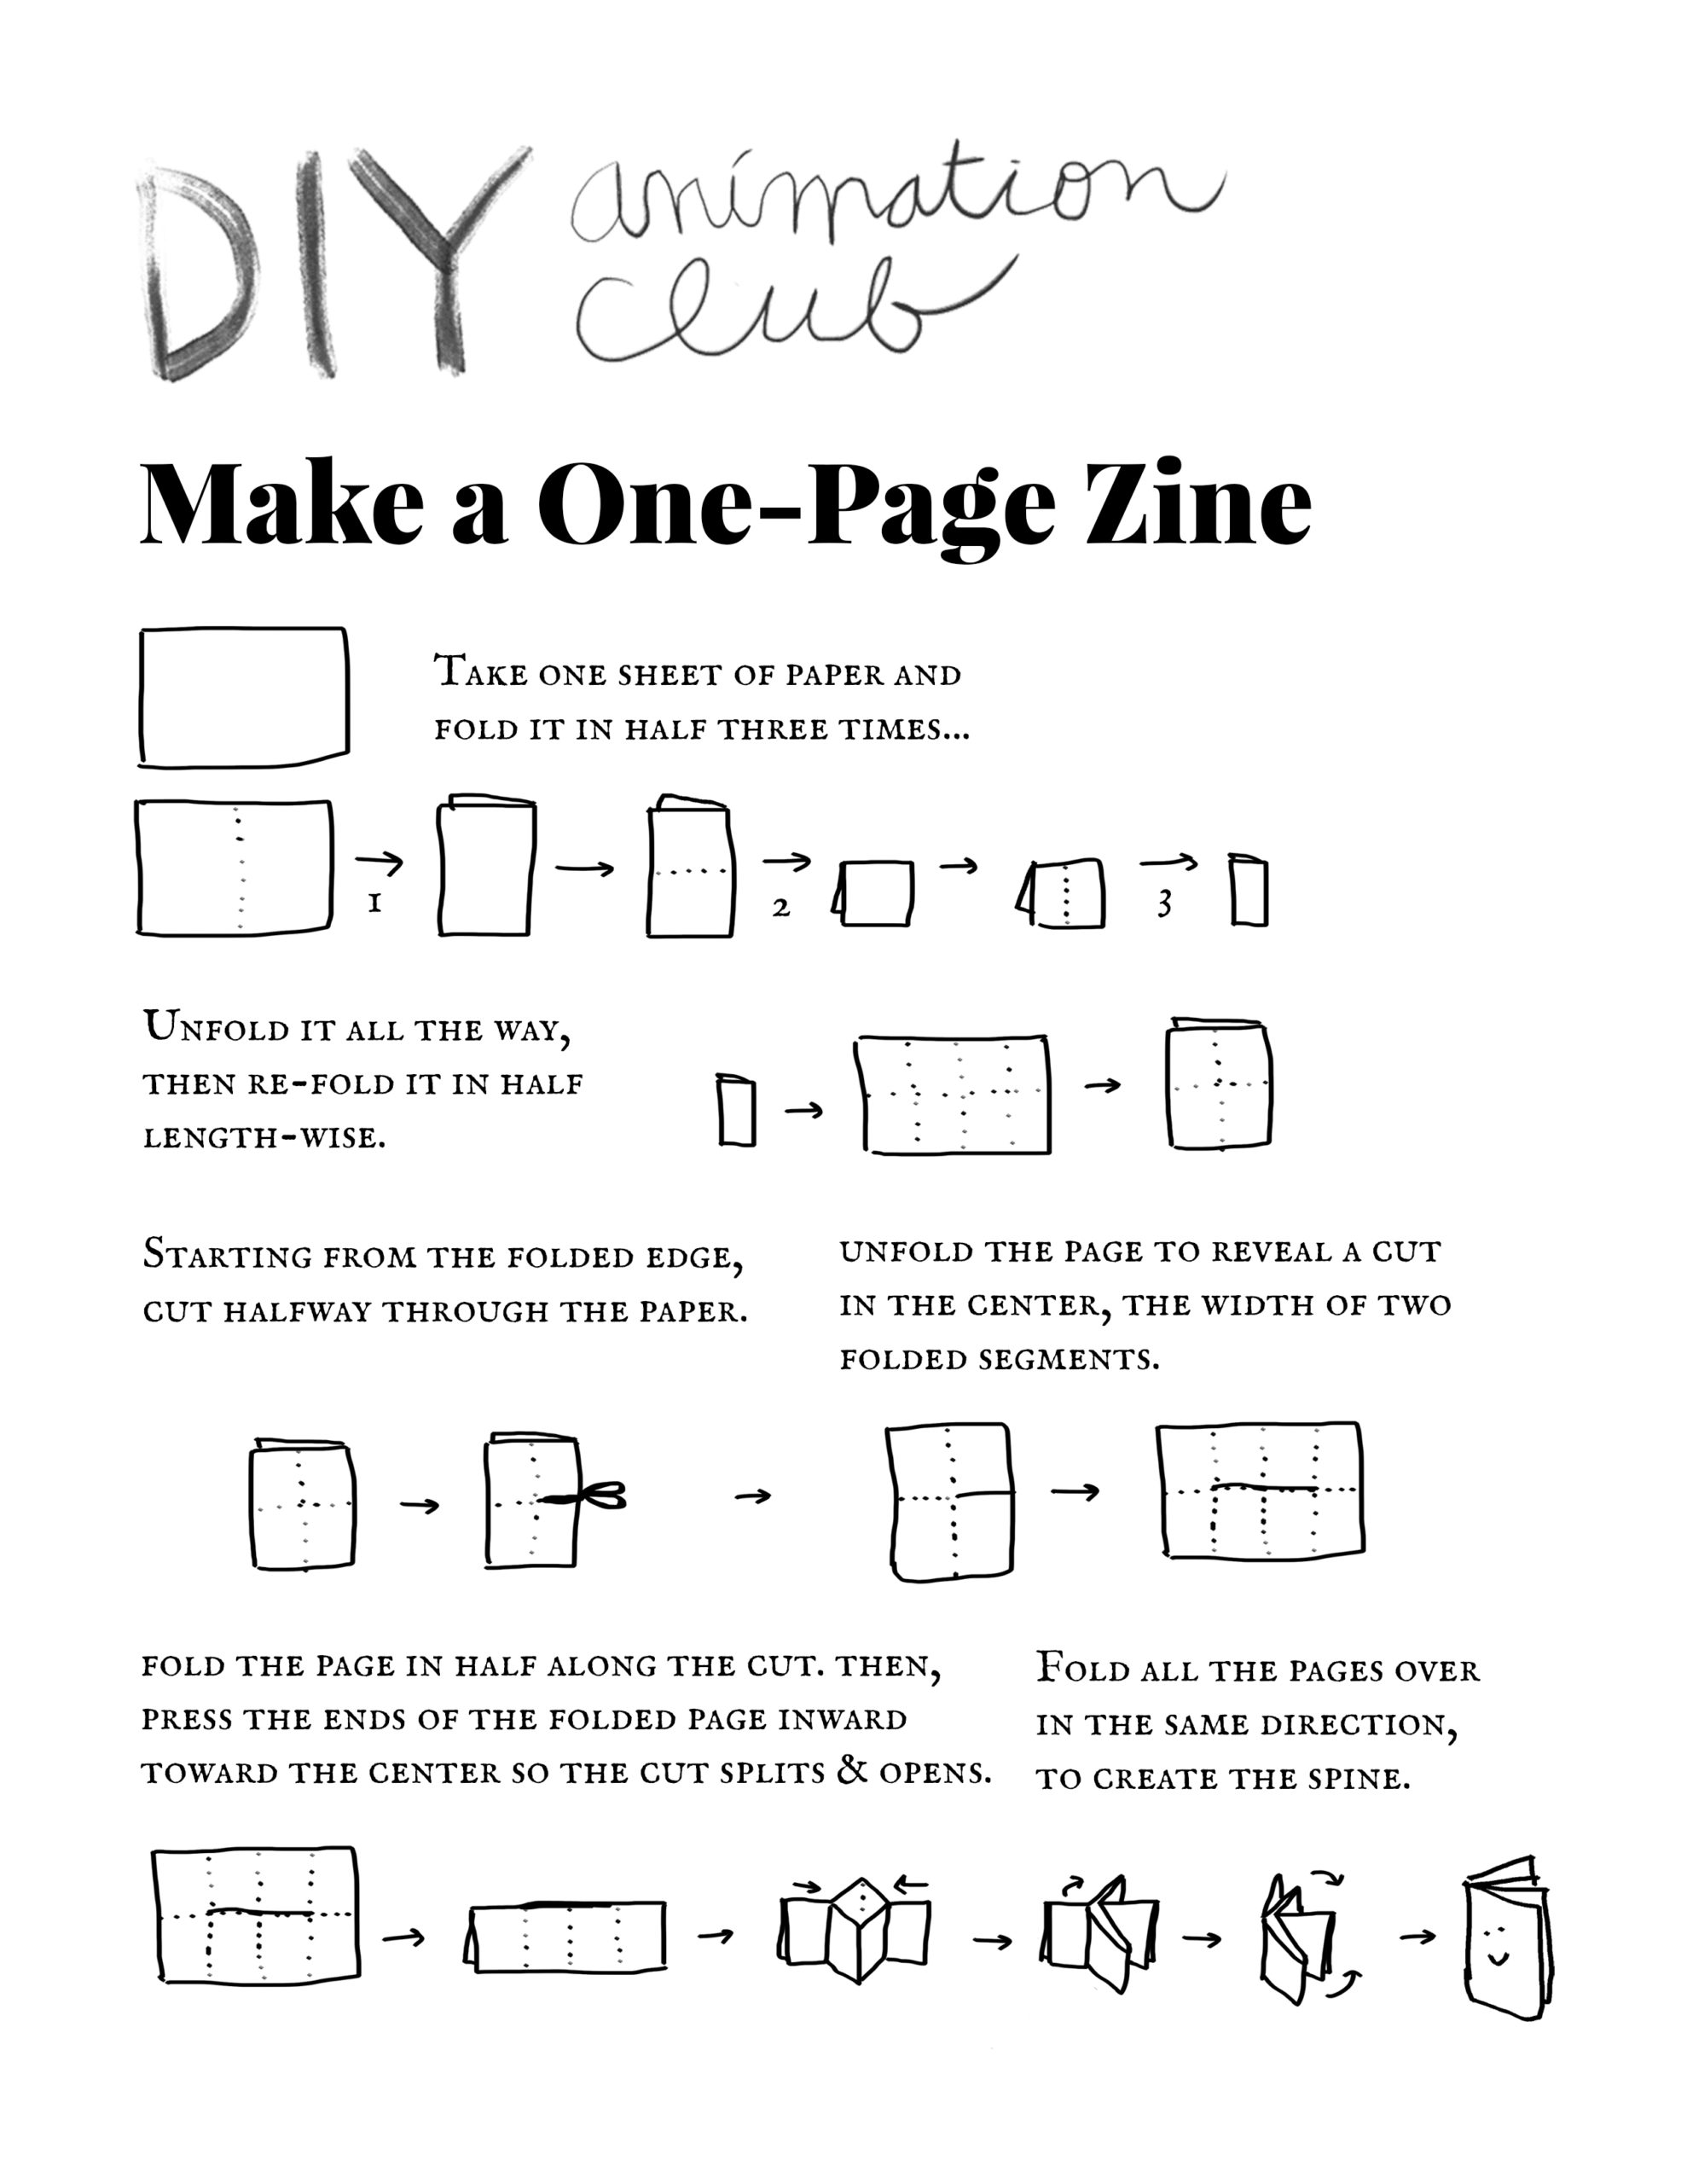 The One-Page Zine As Brainstorming Tool